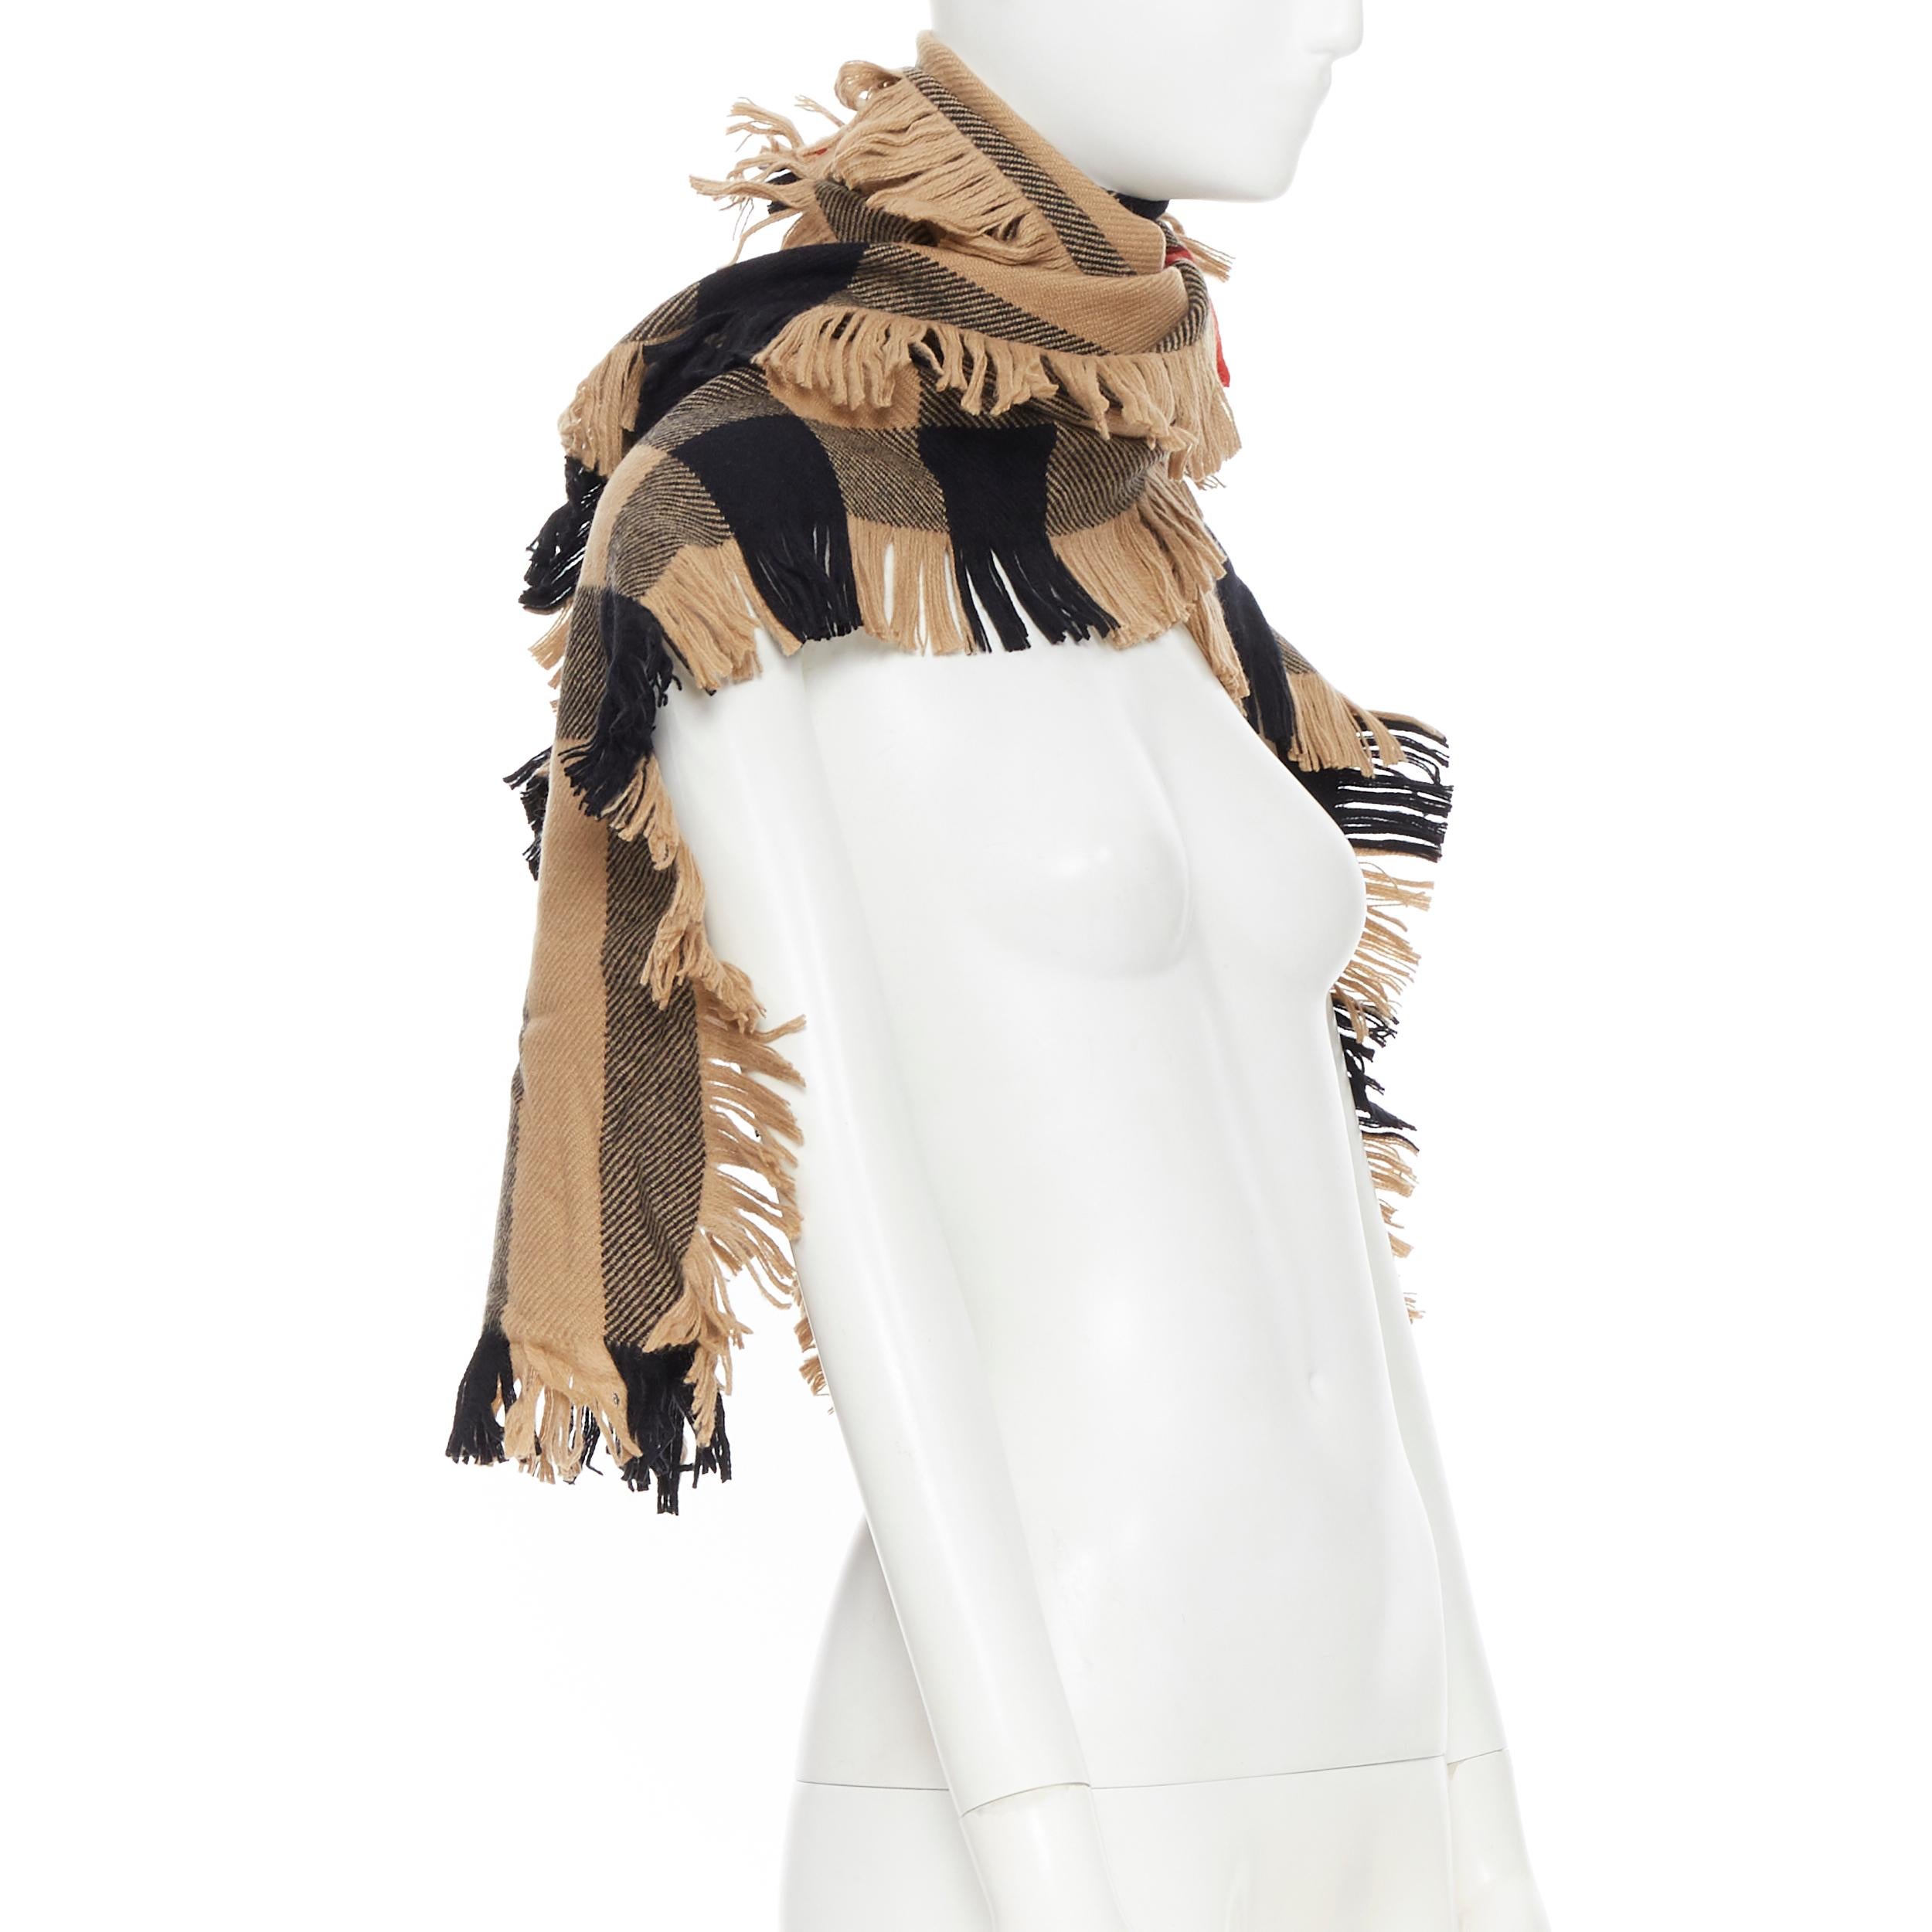 new BURBERRY 100% wooll classic brown House Check fringe trimmed scarf
Brand: Burberry
Model Name / Style: Wool scarf
Material: Wool
Color: Brown
Pattern: Check
Made in: United Kingdom

CONDITION: 
Condition: New without tags.
Comes with: Designer